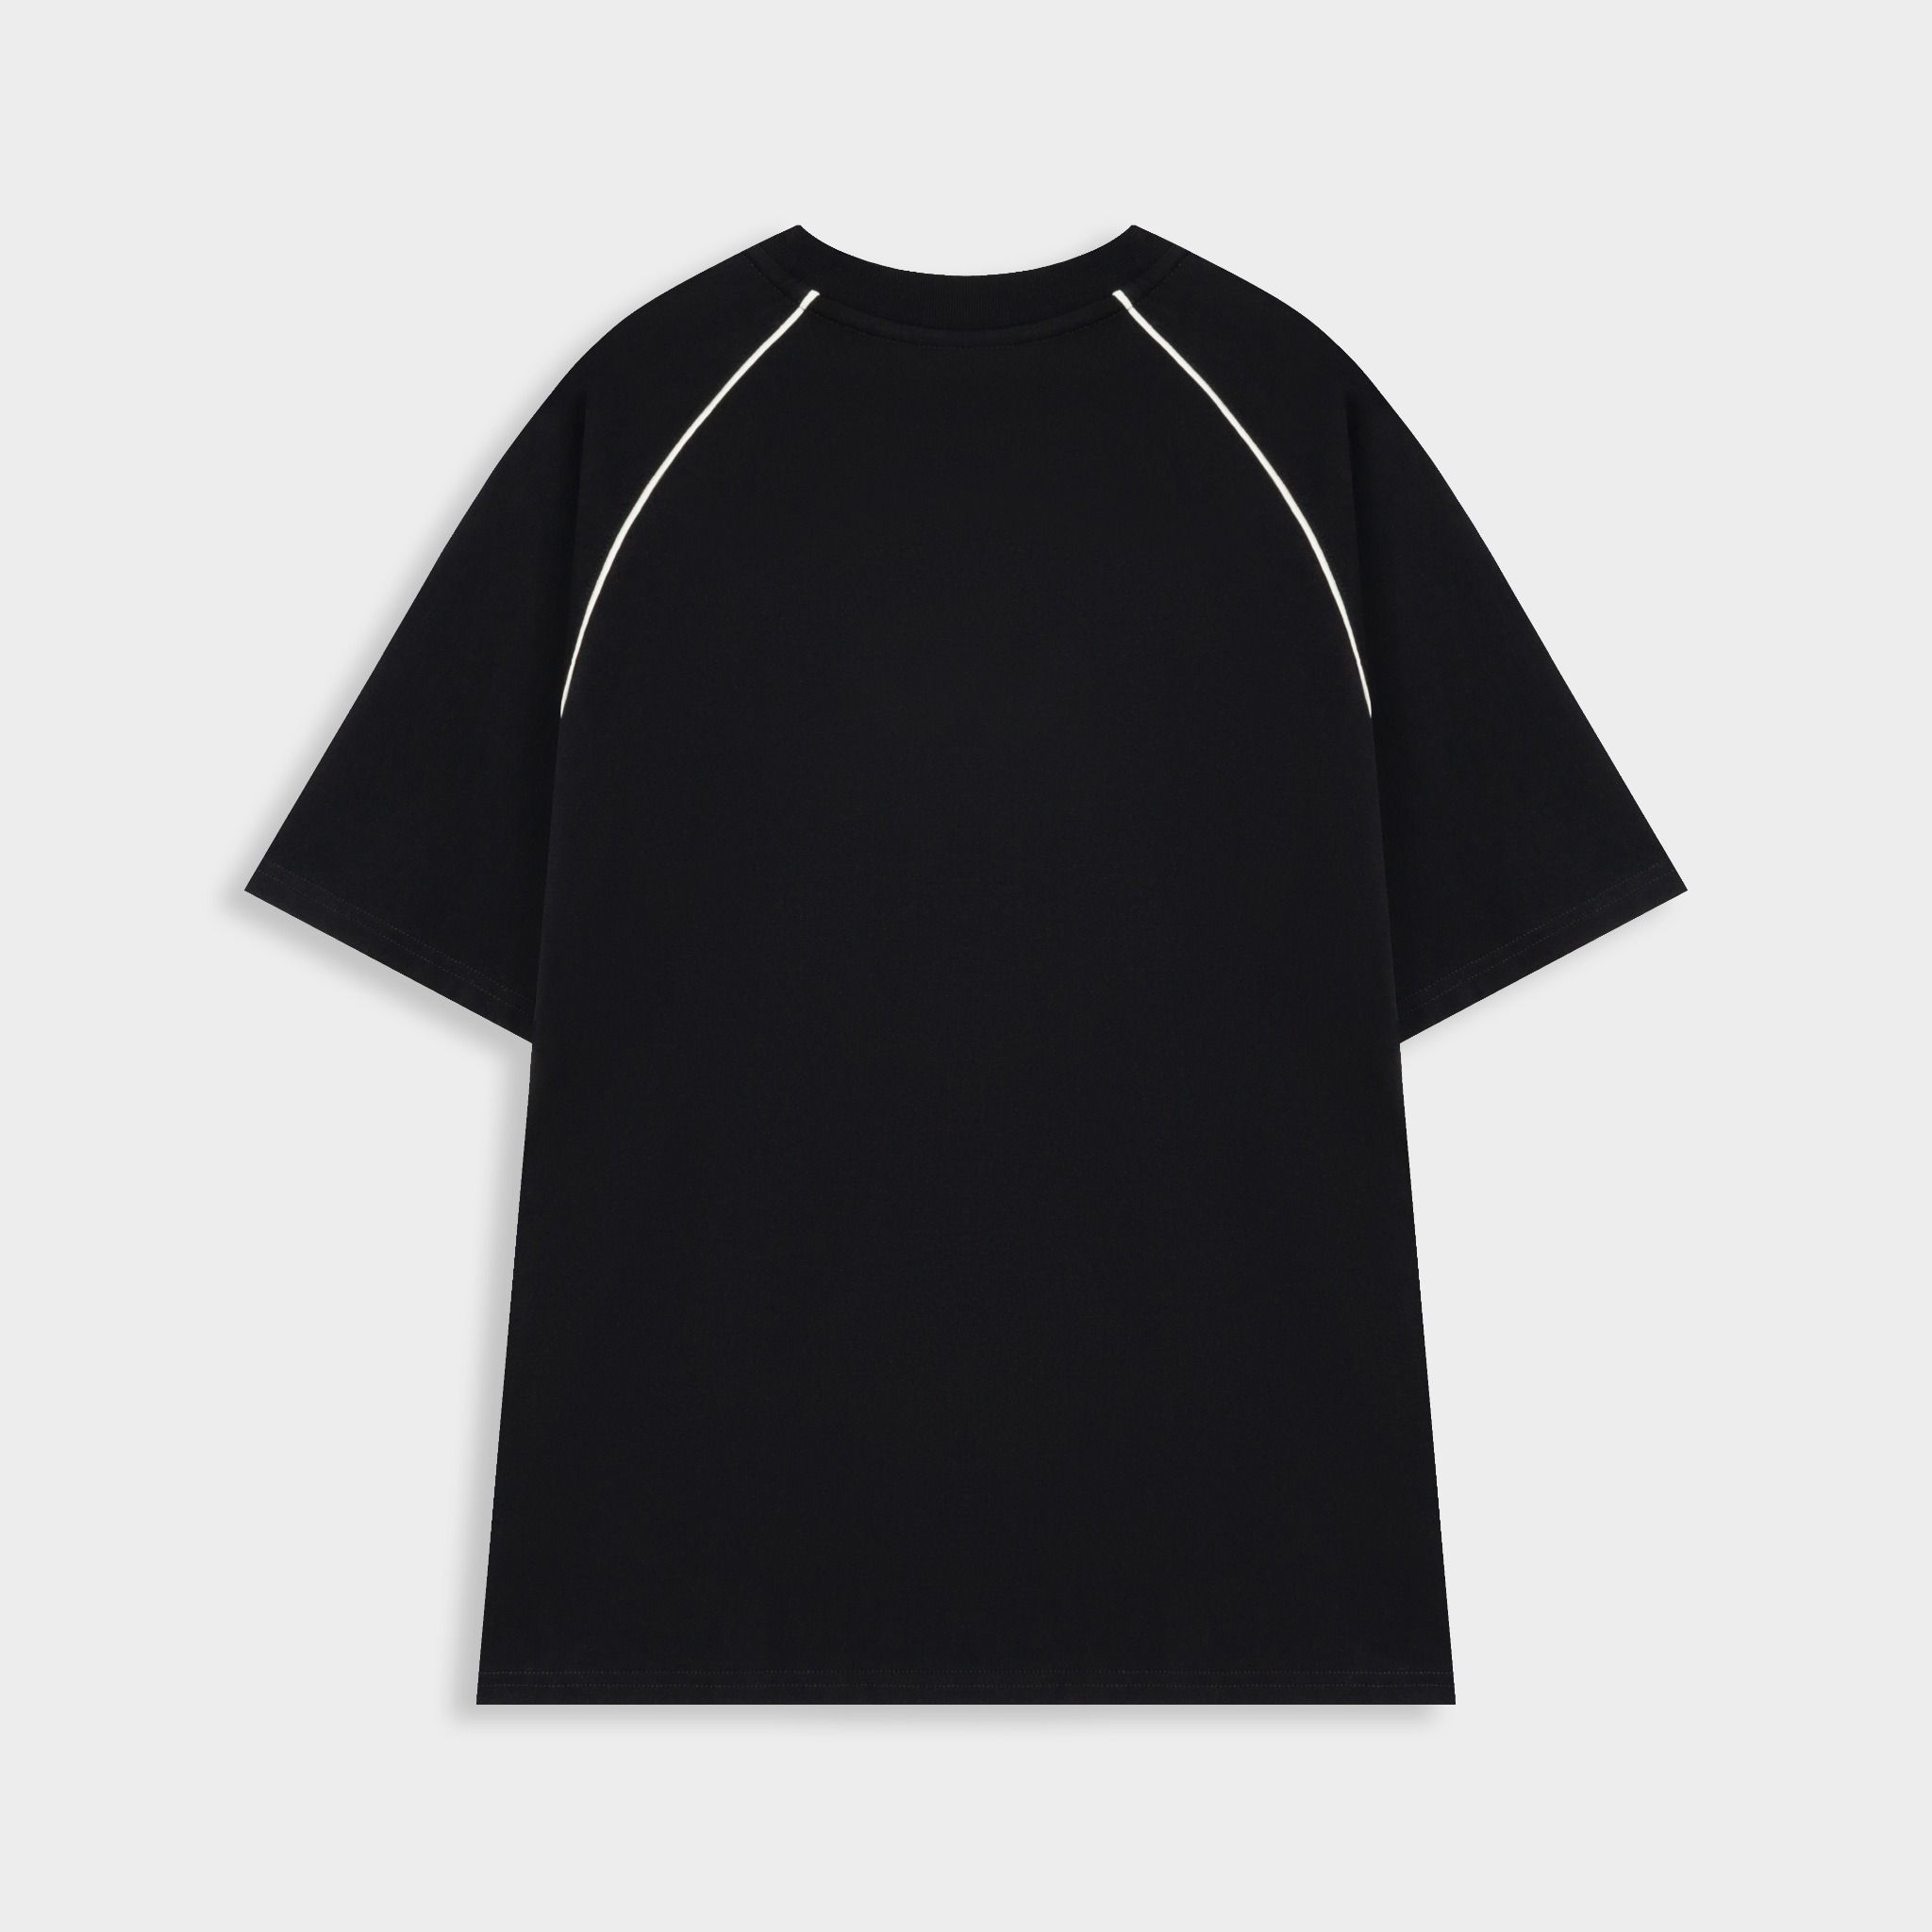  Outerity Line Animals Tee / Black 